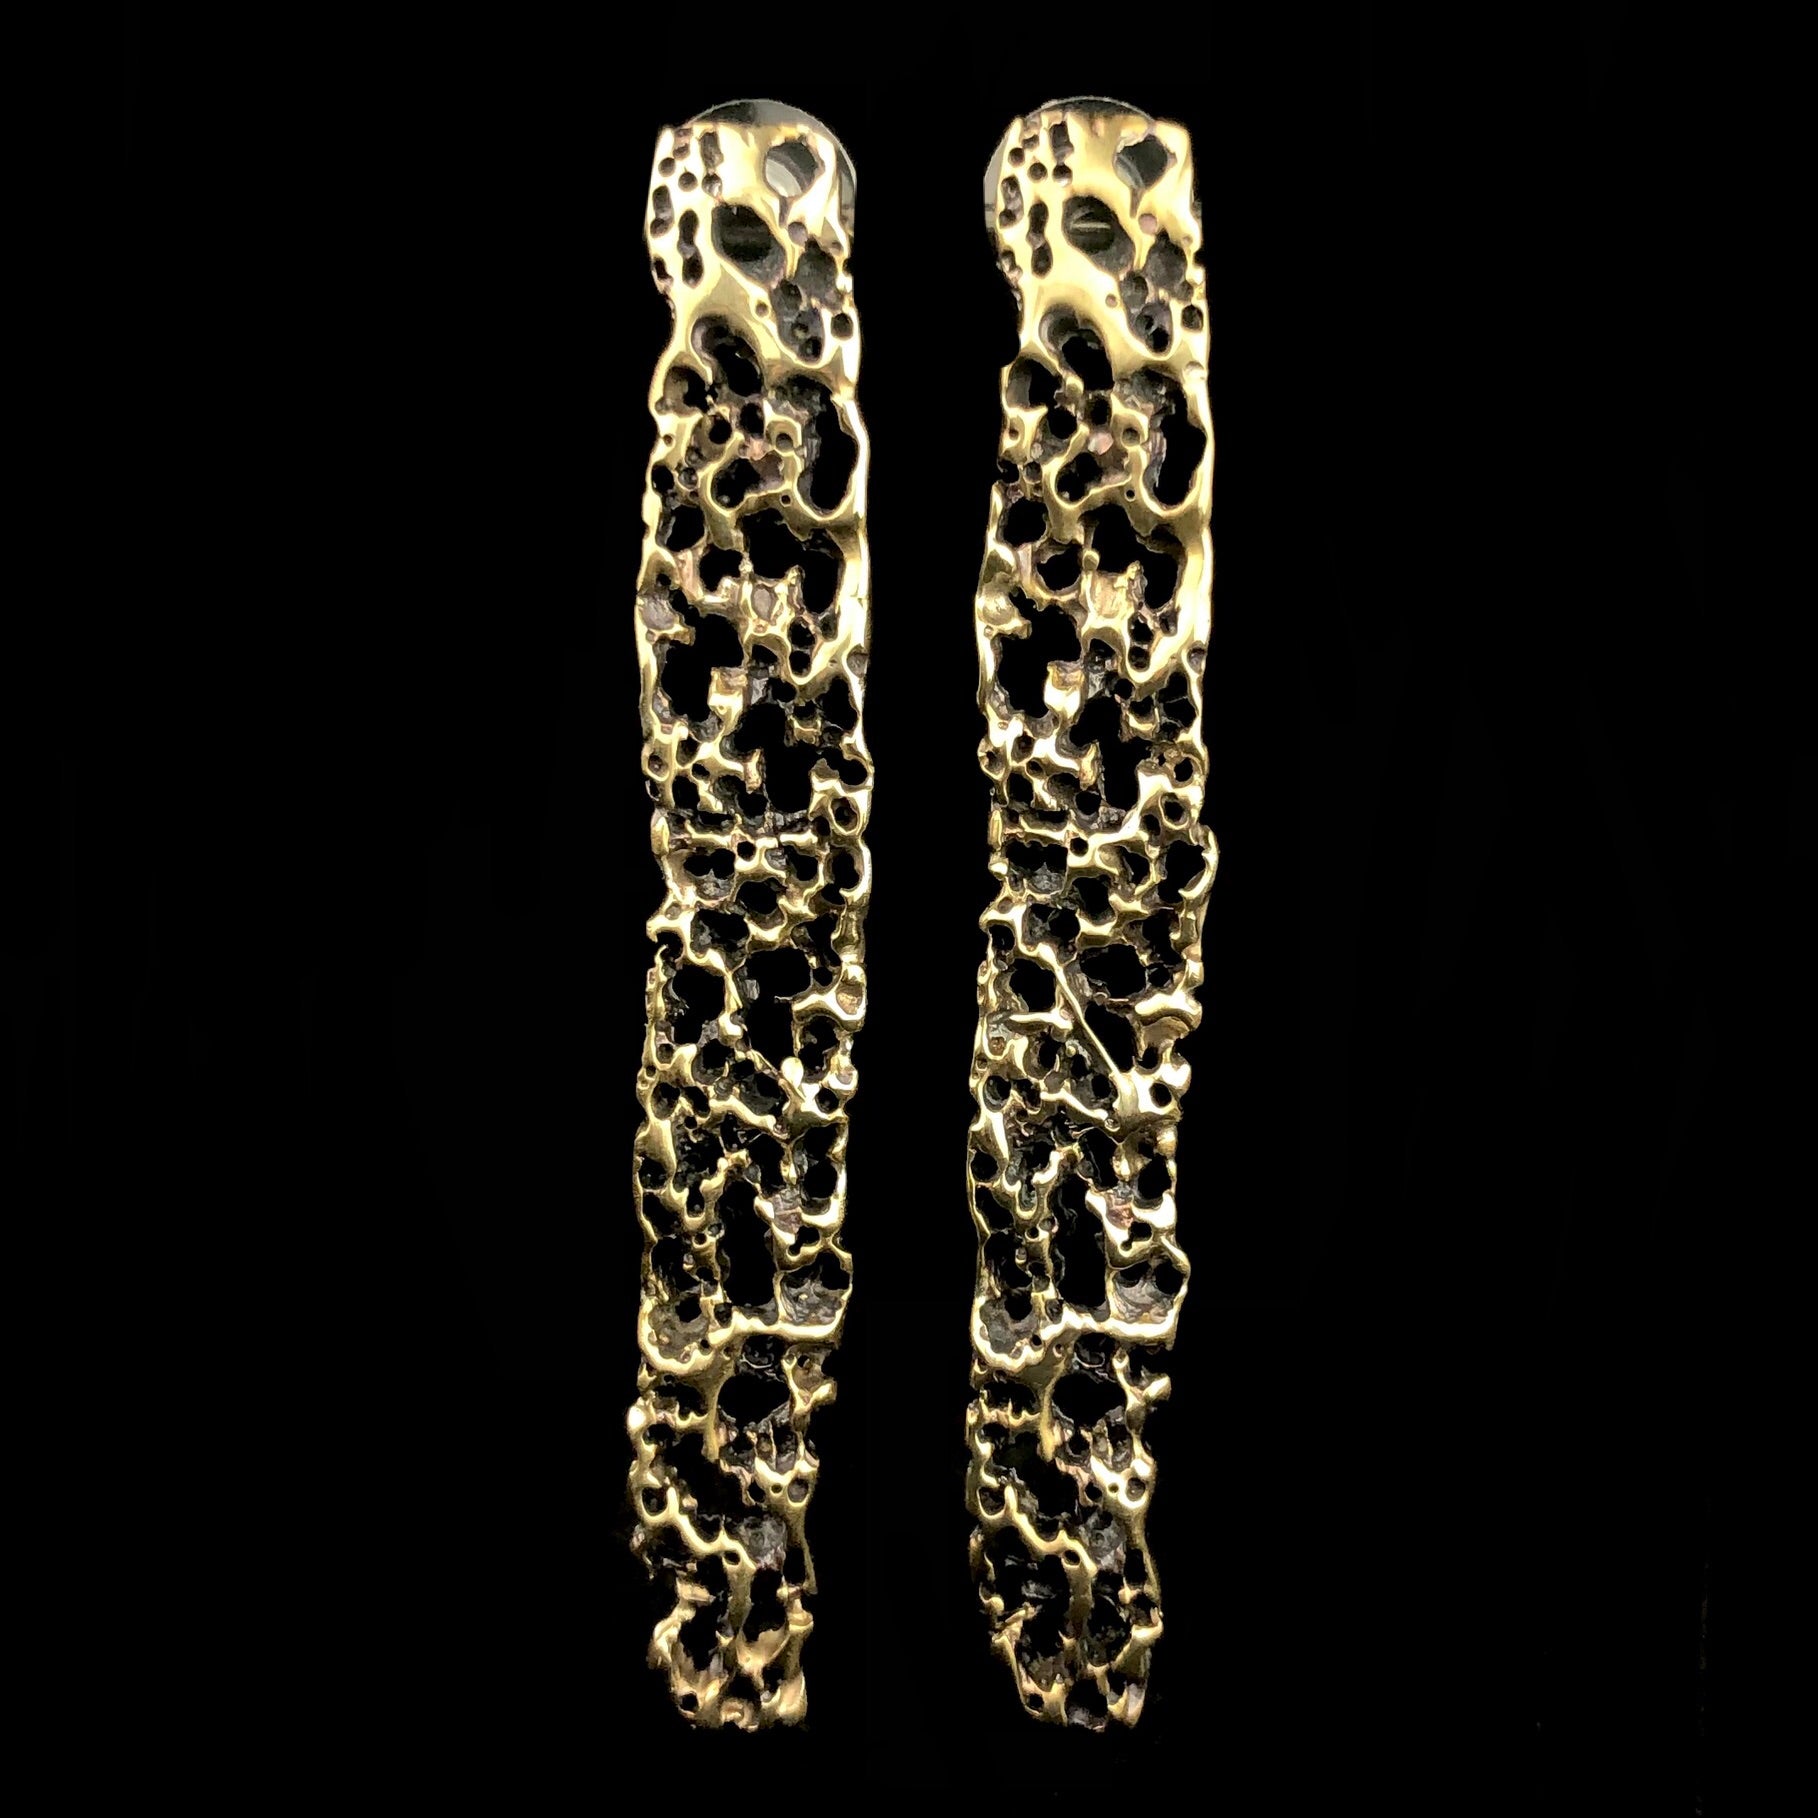 Front view of Atoll Vertical Earrings with black background showing throw open spaces in brass